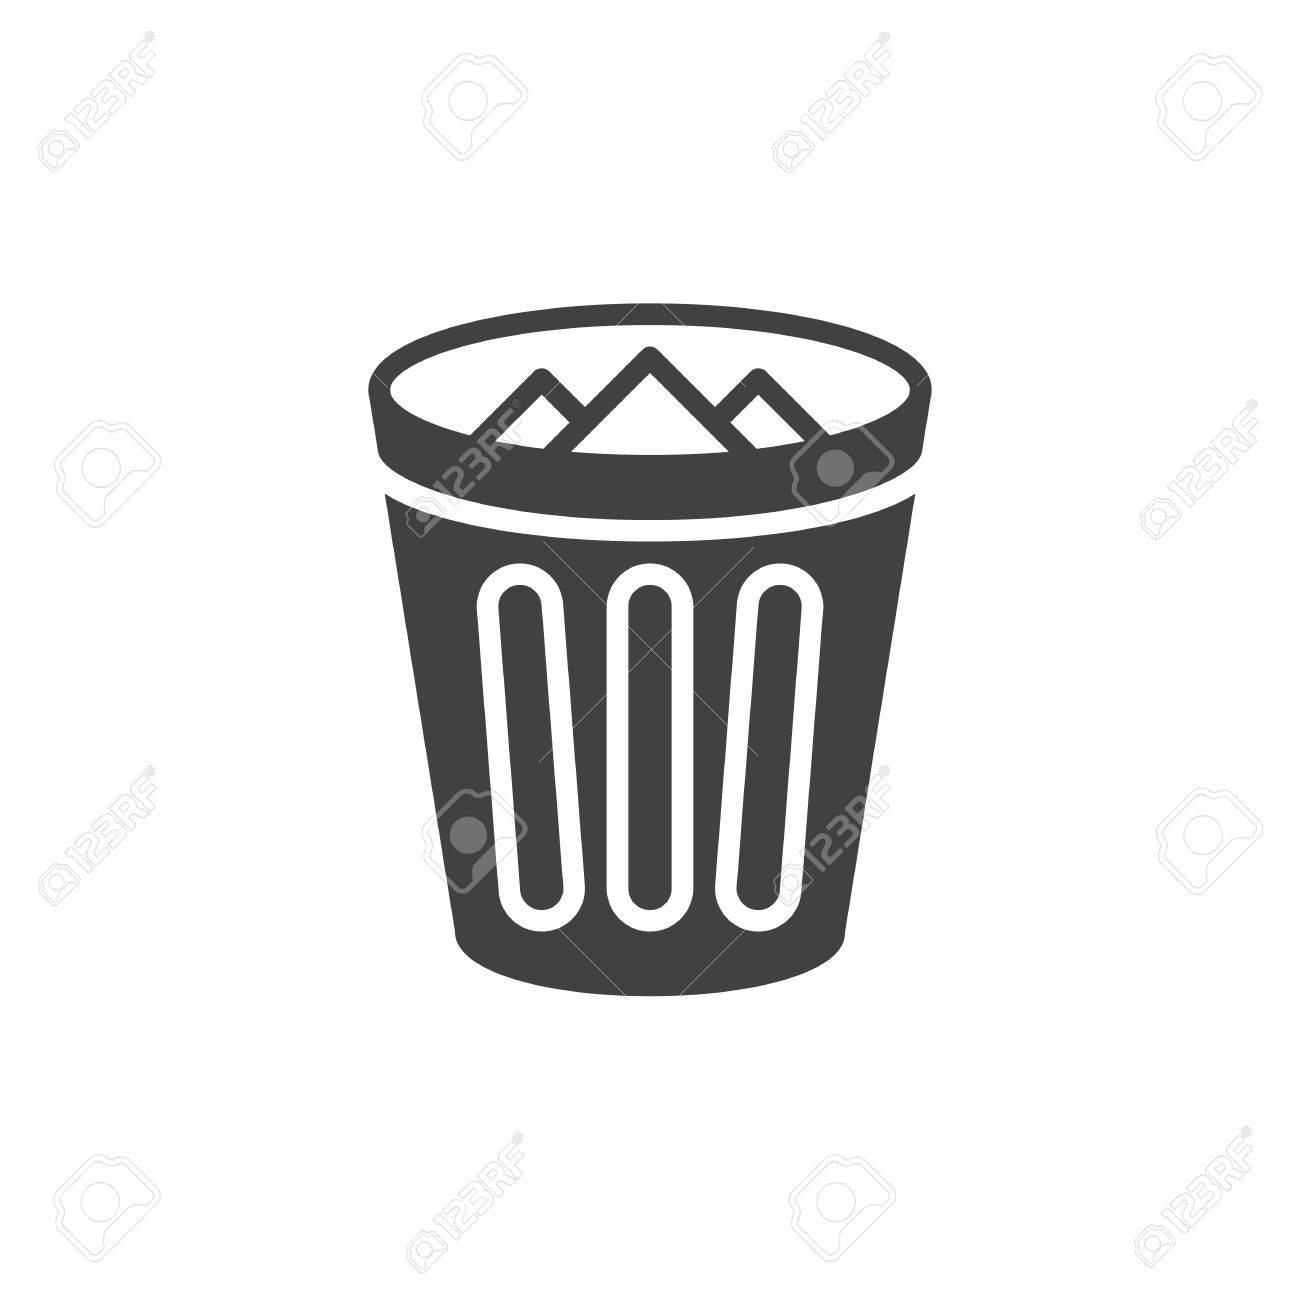 Recycle Bin Icons - Download 330 Free Recycle Bin Icon (Page 1)